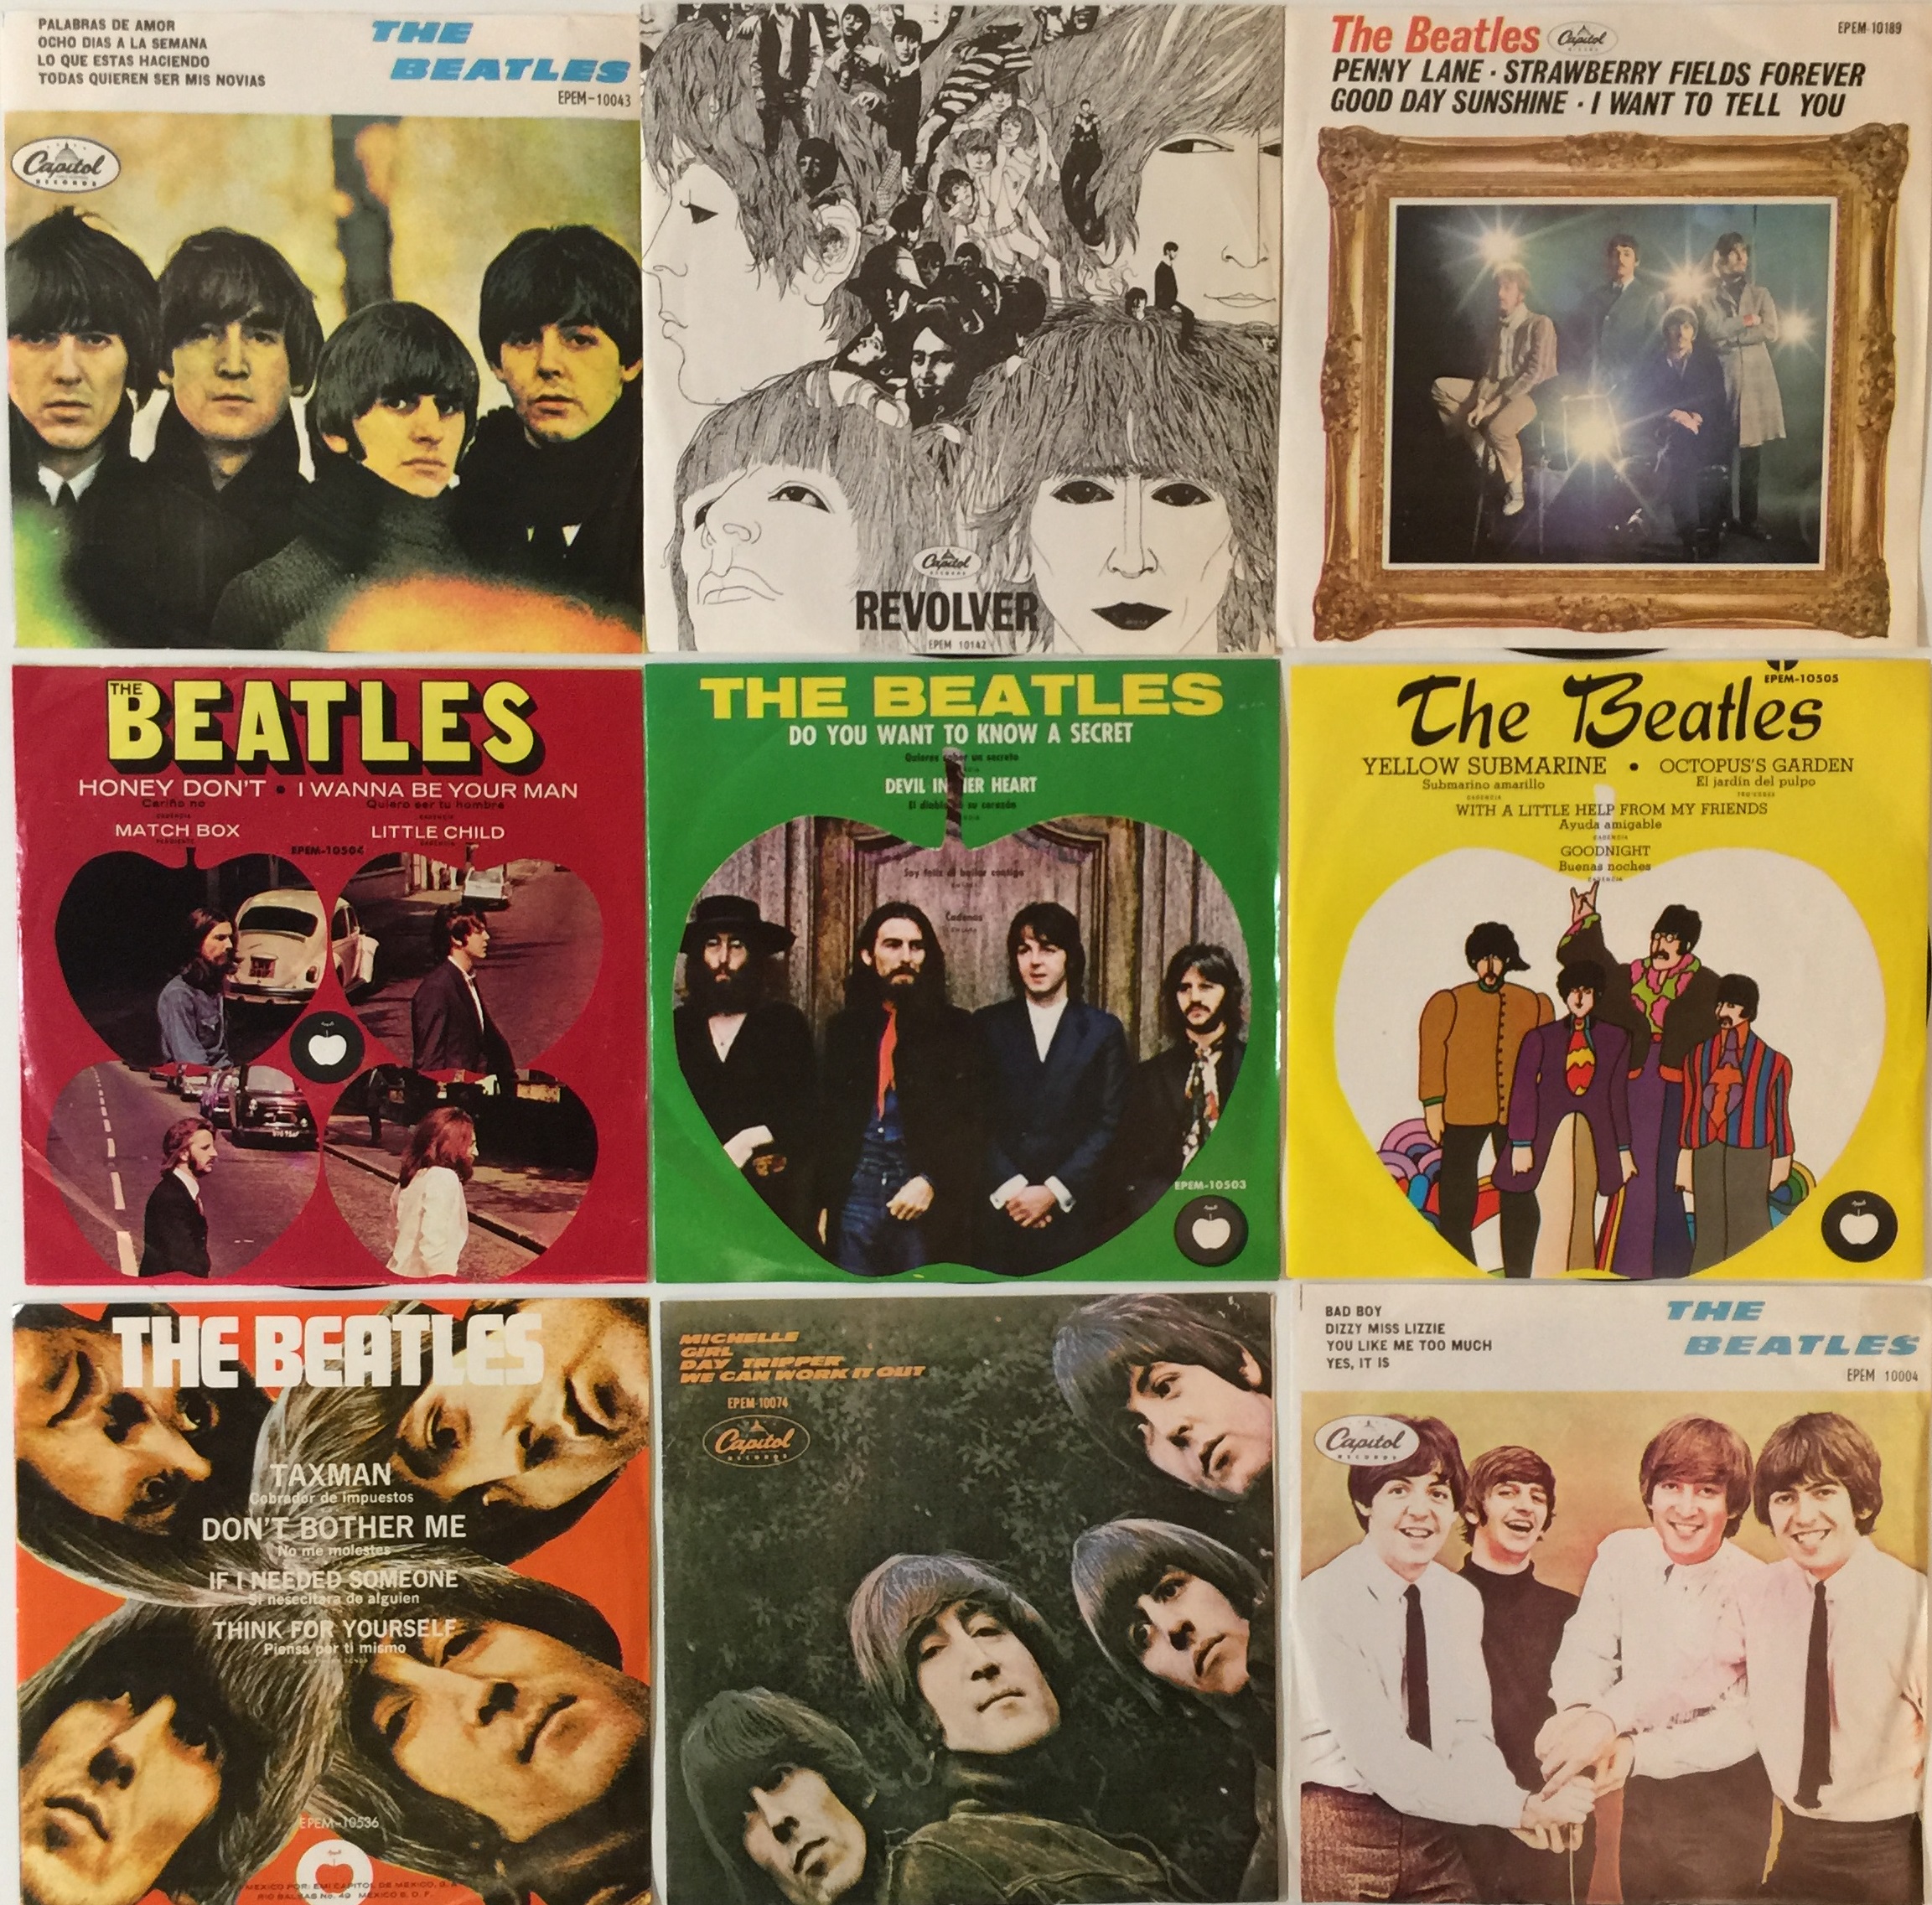 THE BEATLES - SOUTH AMERICAN 7" COLLECTION.